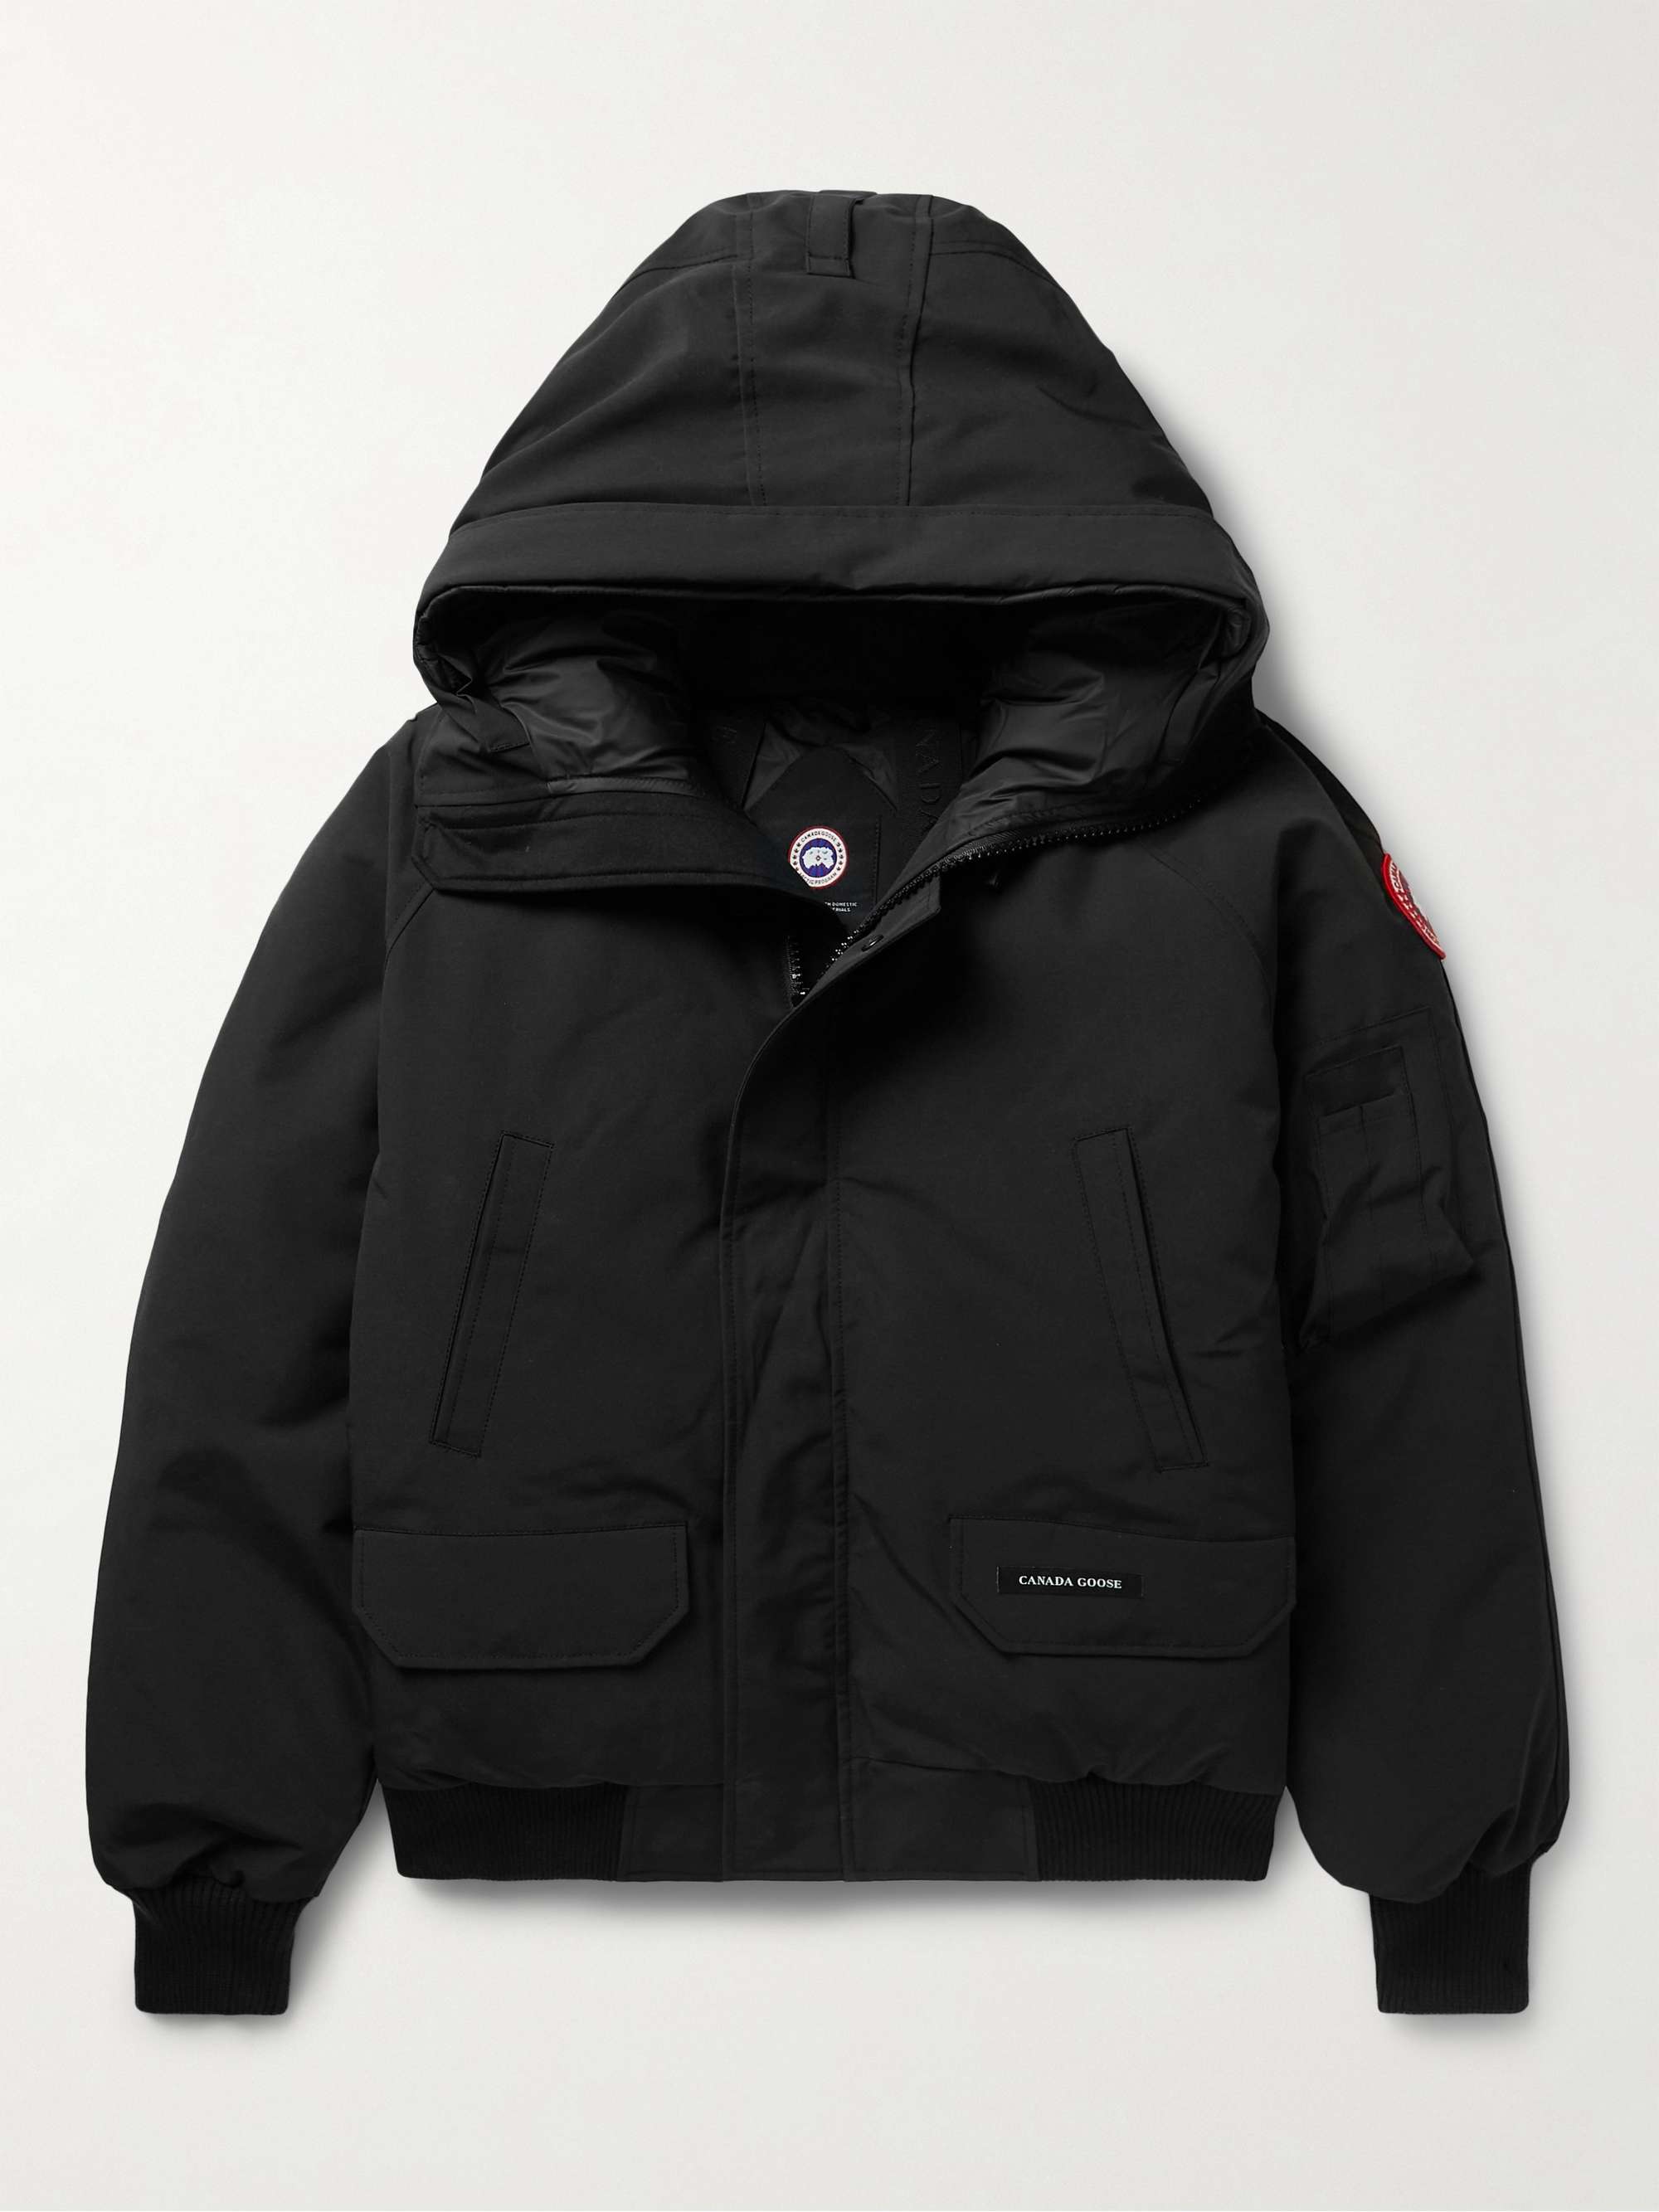 CANADA GOOSE Chilliwack Arctic Tech® Hooded Down Jacket for Men